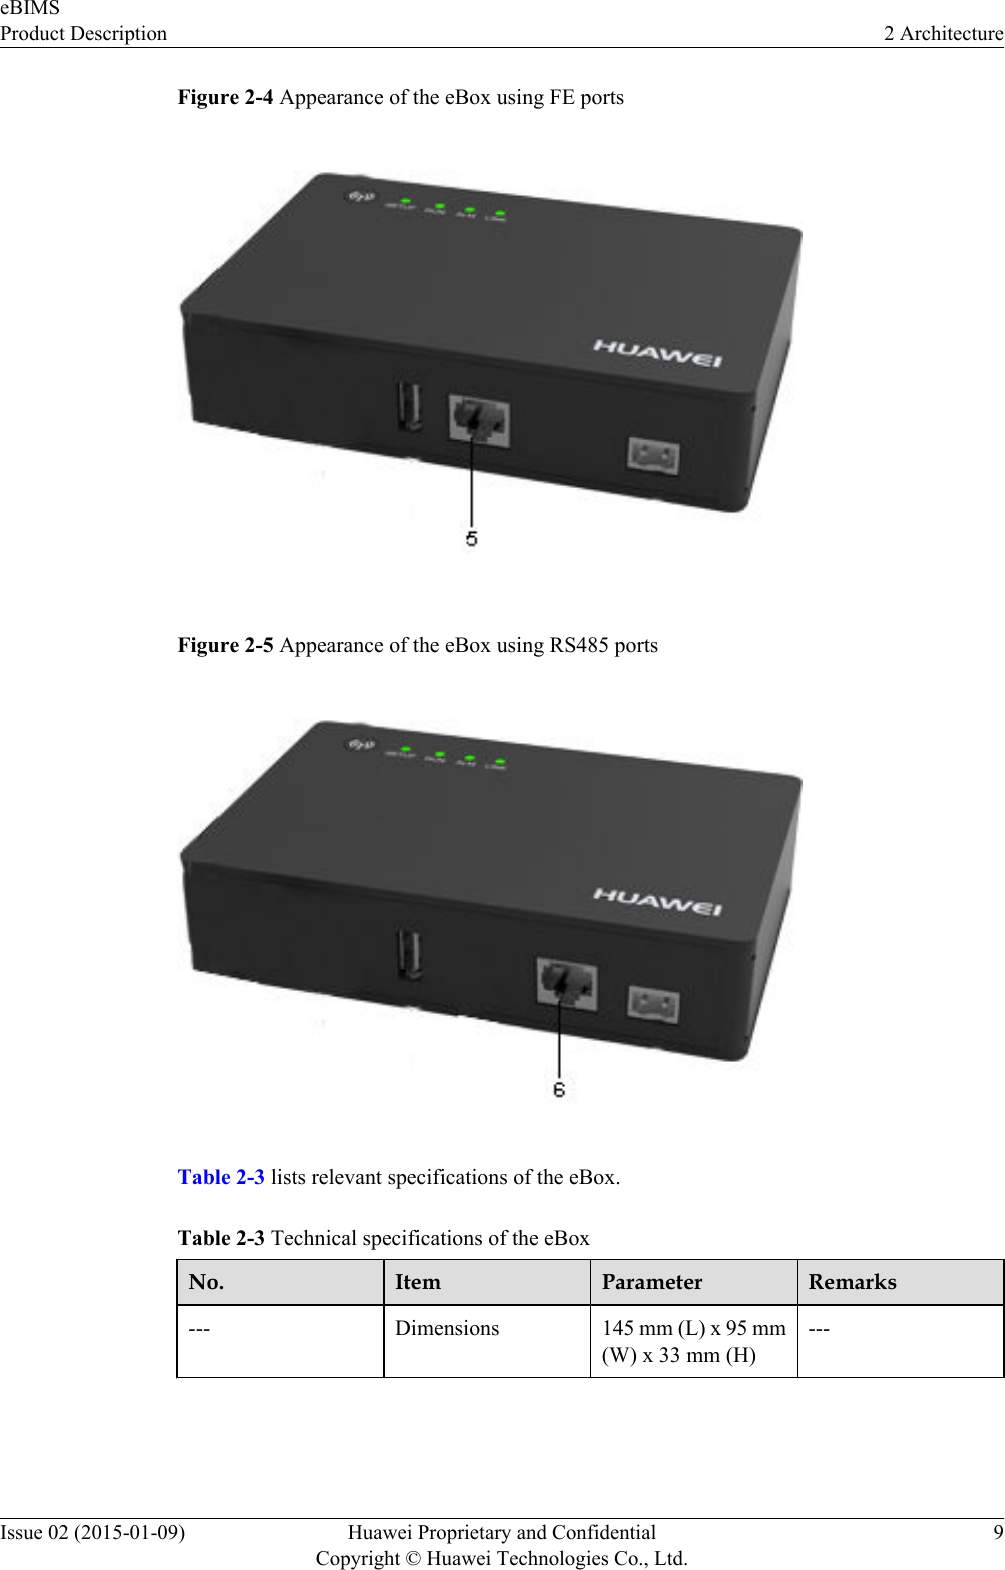 Figure 2-4 Appearance of the eBox using FE portsFigure 2-5 Appearance of the eBox using RS485 portsTable 2-3 lists relevant specifications of the eBox.Table 2-3 Technical specifications of the eBoxNo. Item Parameter Remarks--- Dimensions 145 mm (L) x 95 mm(W) x 33 mm (H)---eBIMSProduct Description 2 ArchitectureIssue 02 (2015-01-09) Huawei Proprietary and ConfidentialCopyright © Huawei Technologies Co., Ltd.9